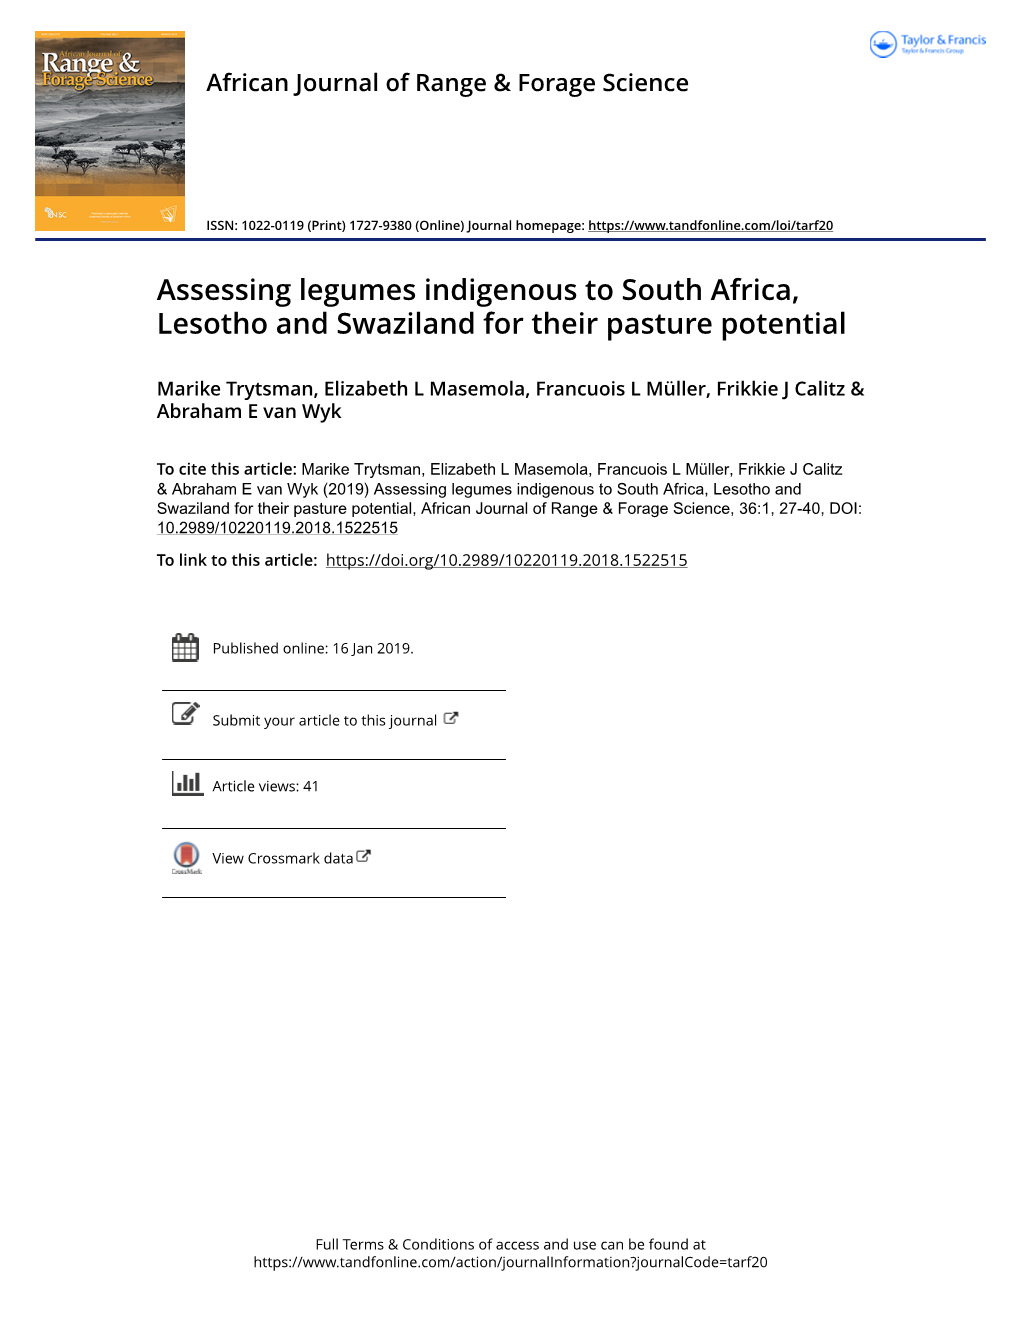 Assessing Legumes Indigenous to South Africa, Lesotho and Swaziland for Their Pasture Potential